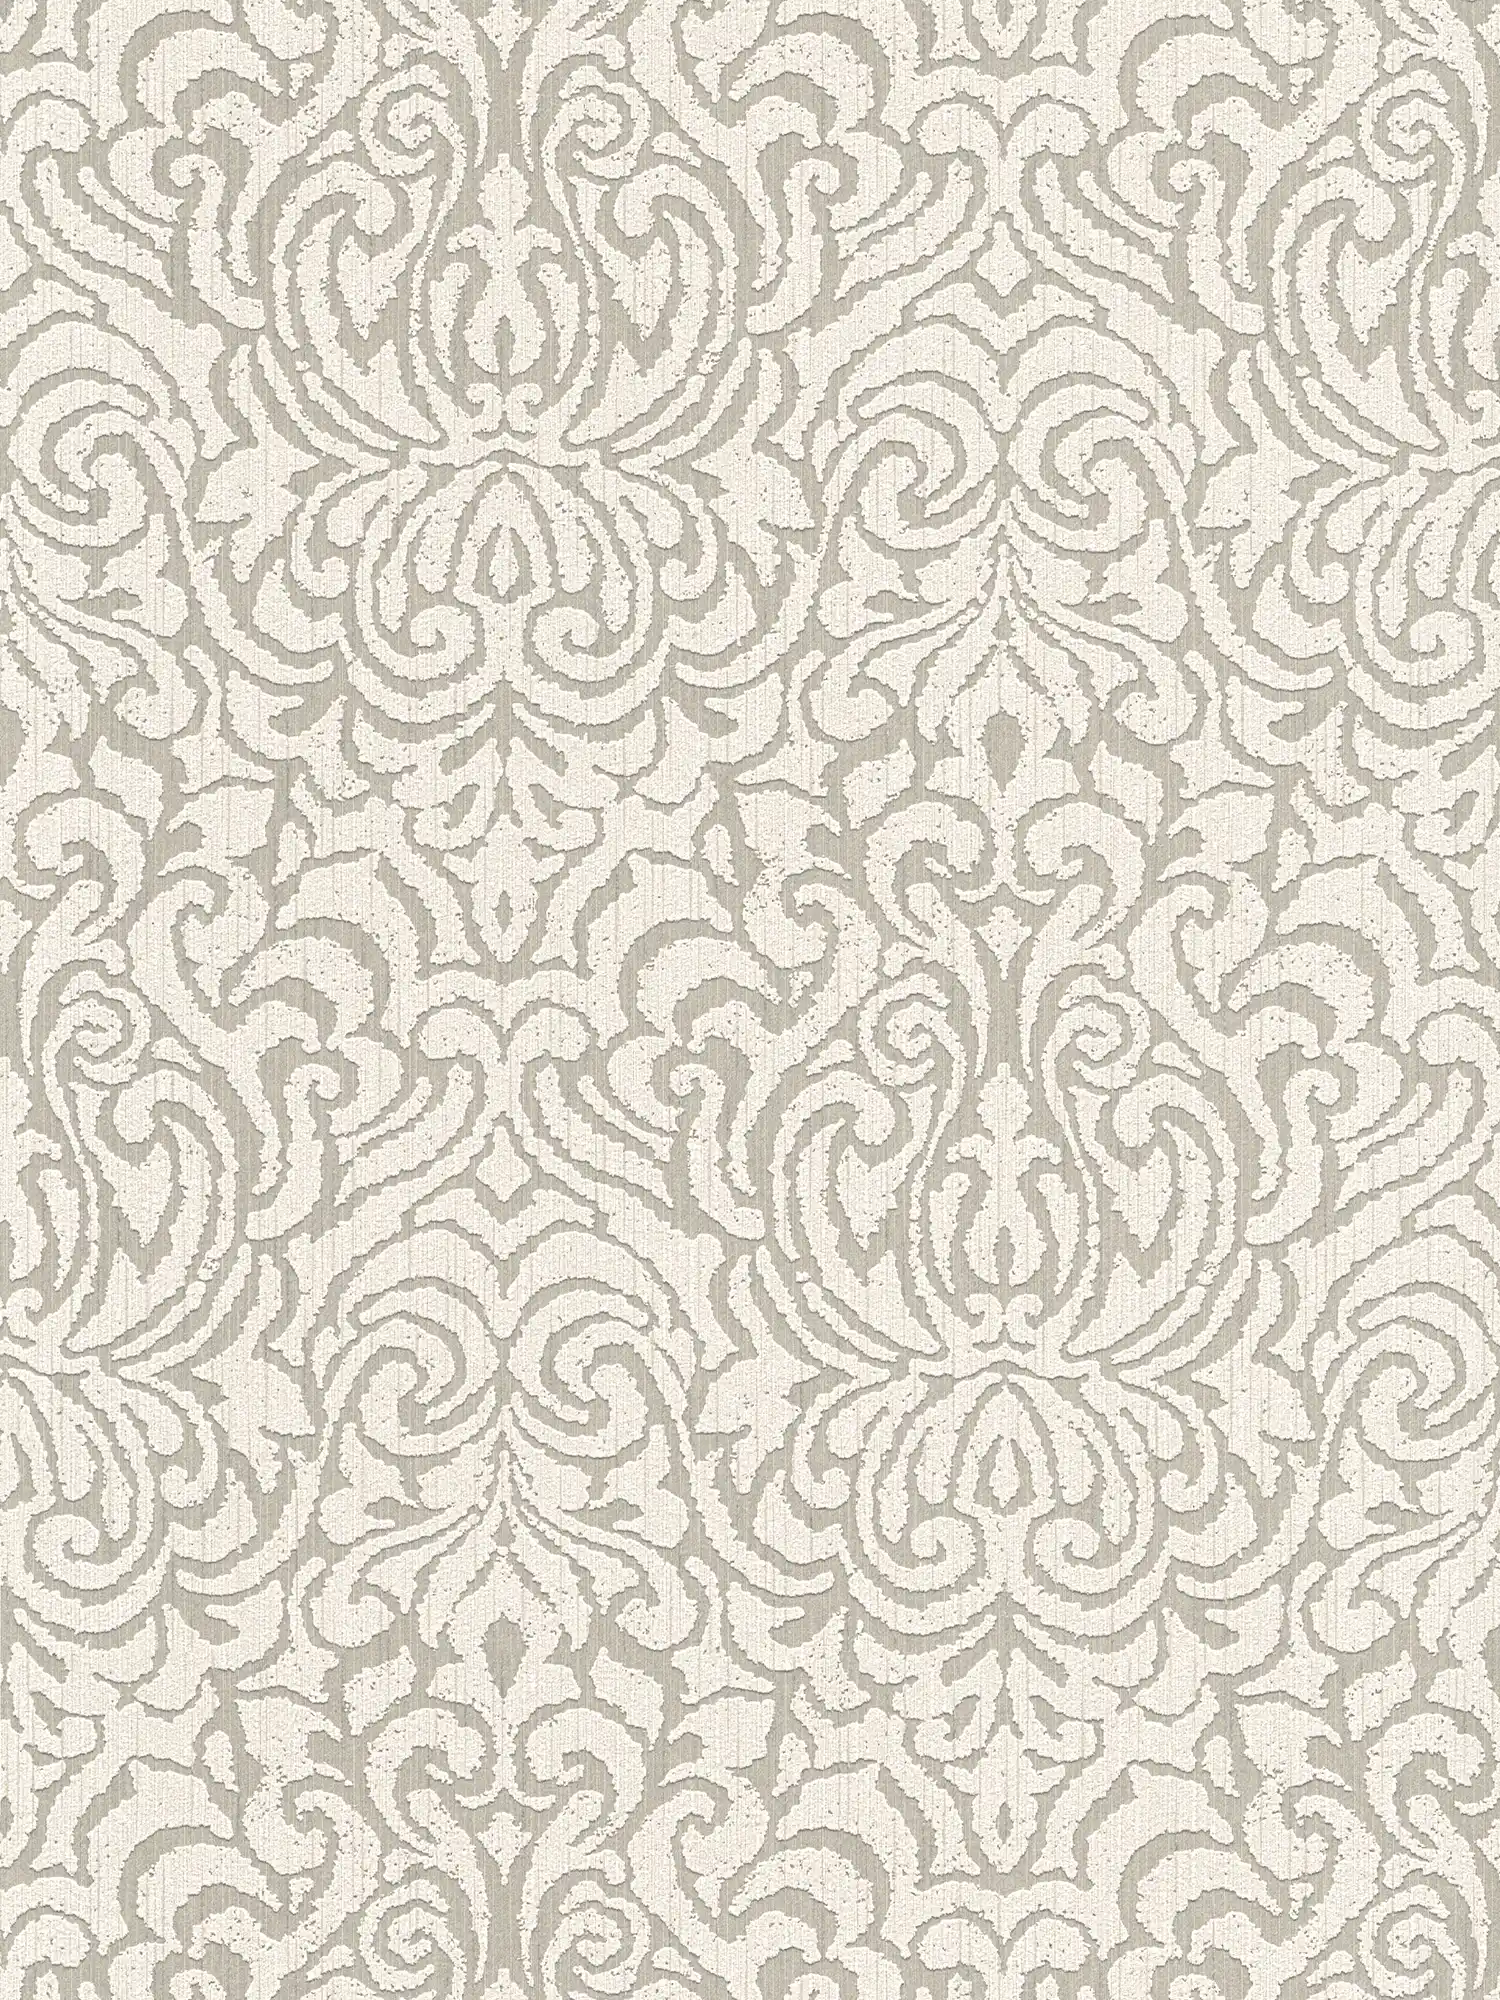 Ornament Tapete Barock im Used Look Shabby Chic – Beige, Creme
